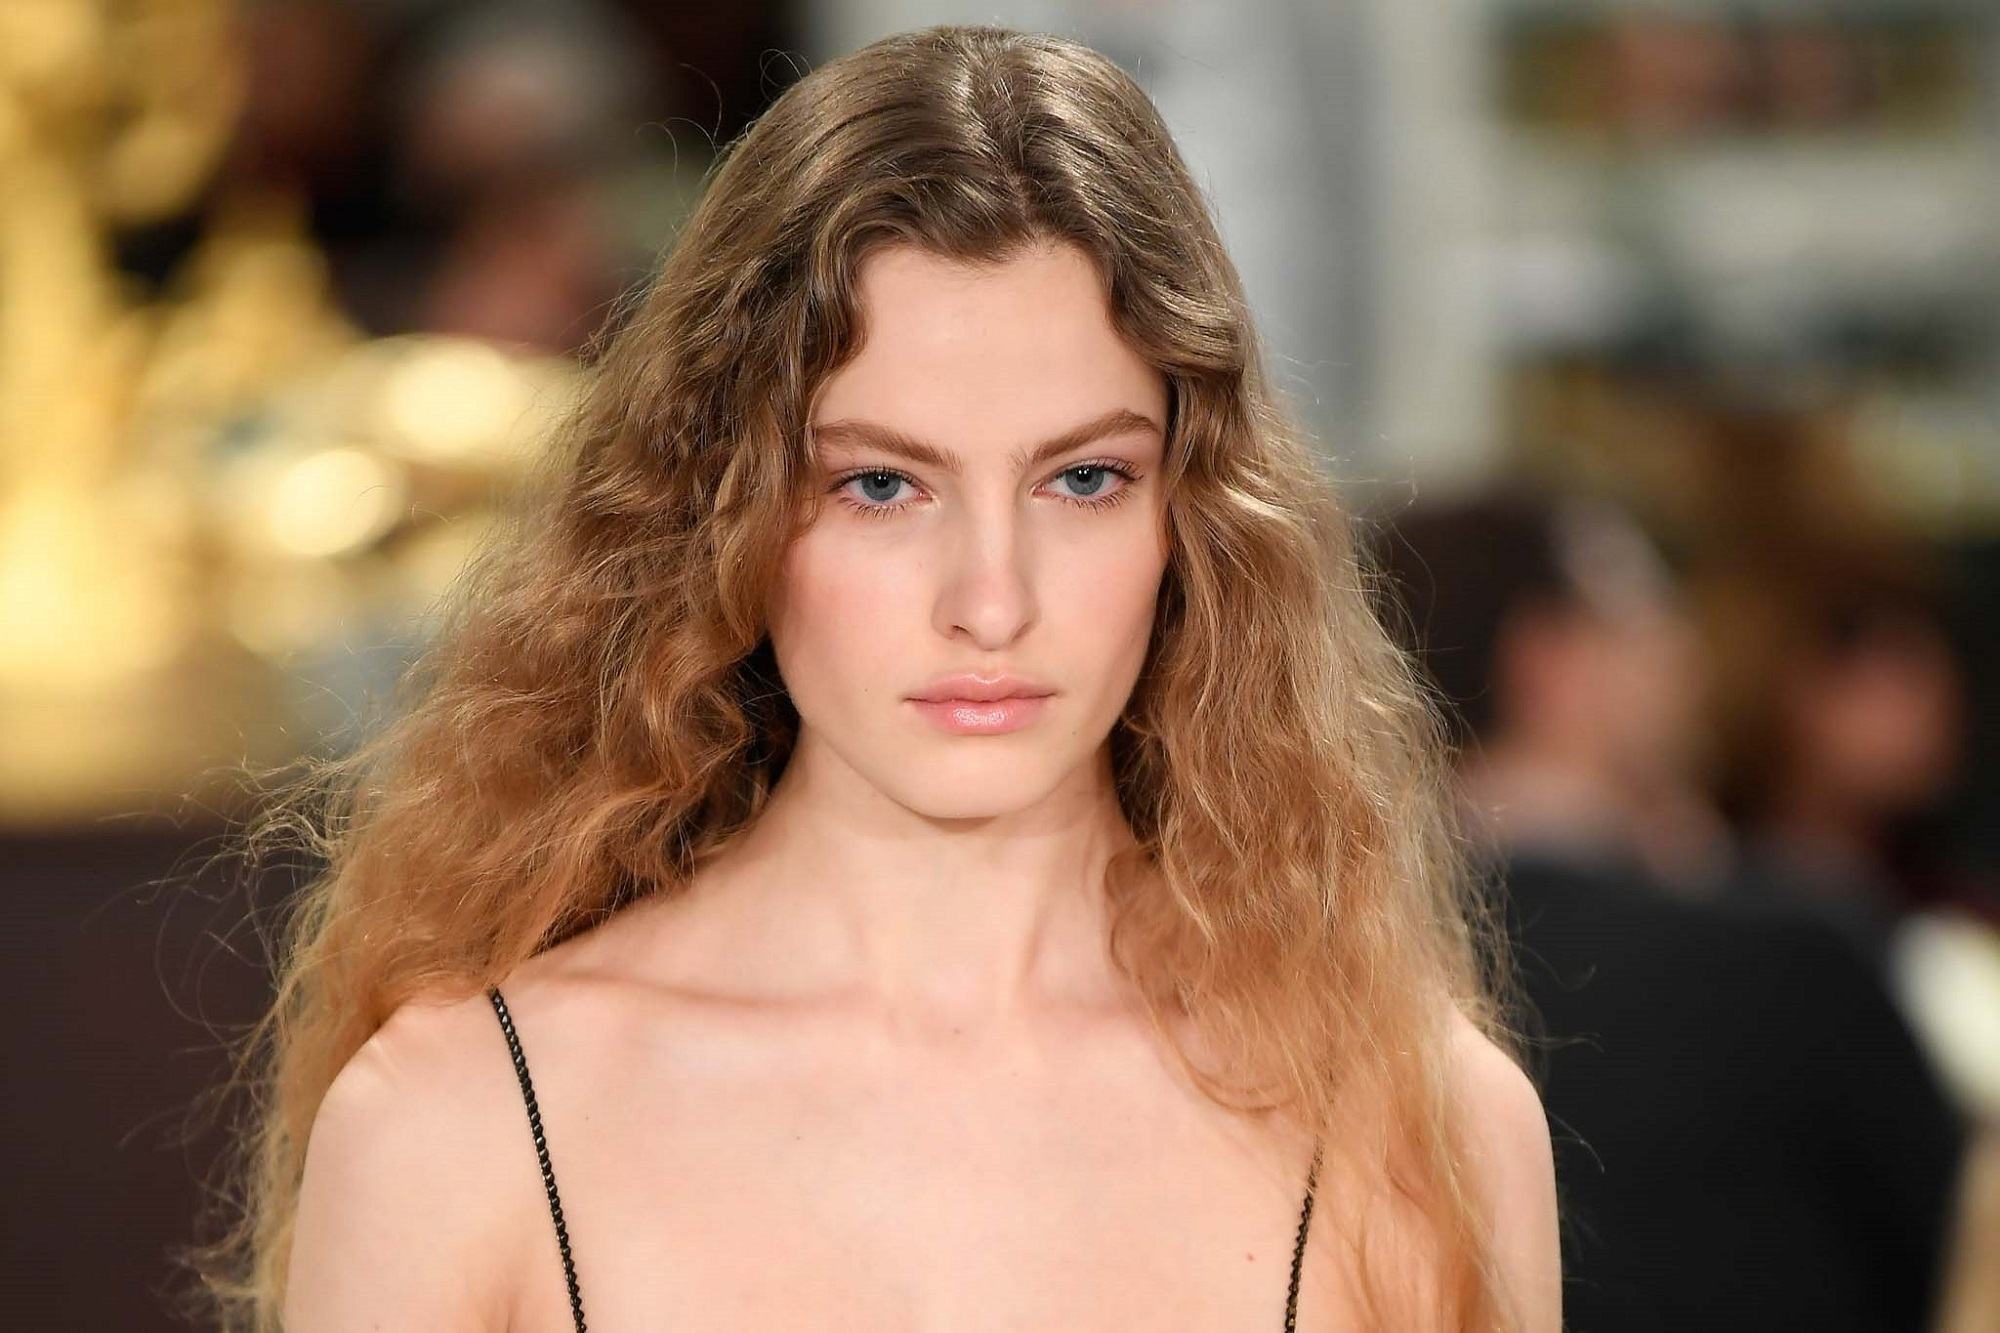 New York Fashion Week Hair: Closeup shot of a woman with long brown curly hair wearing a thin-strapped dress